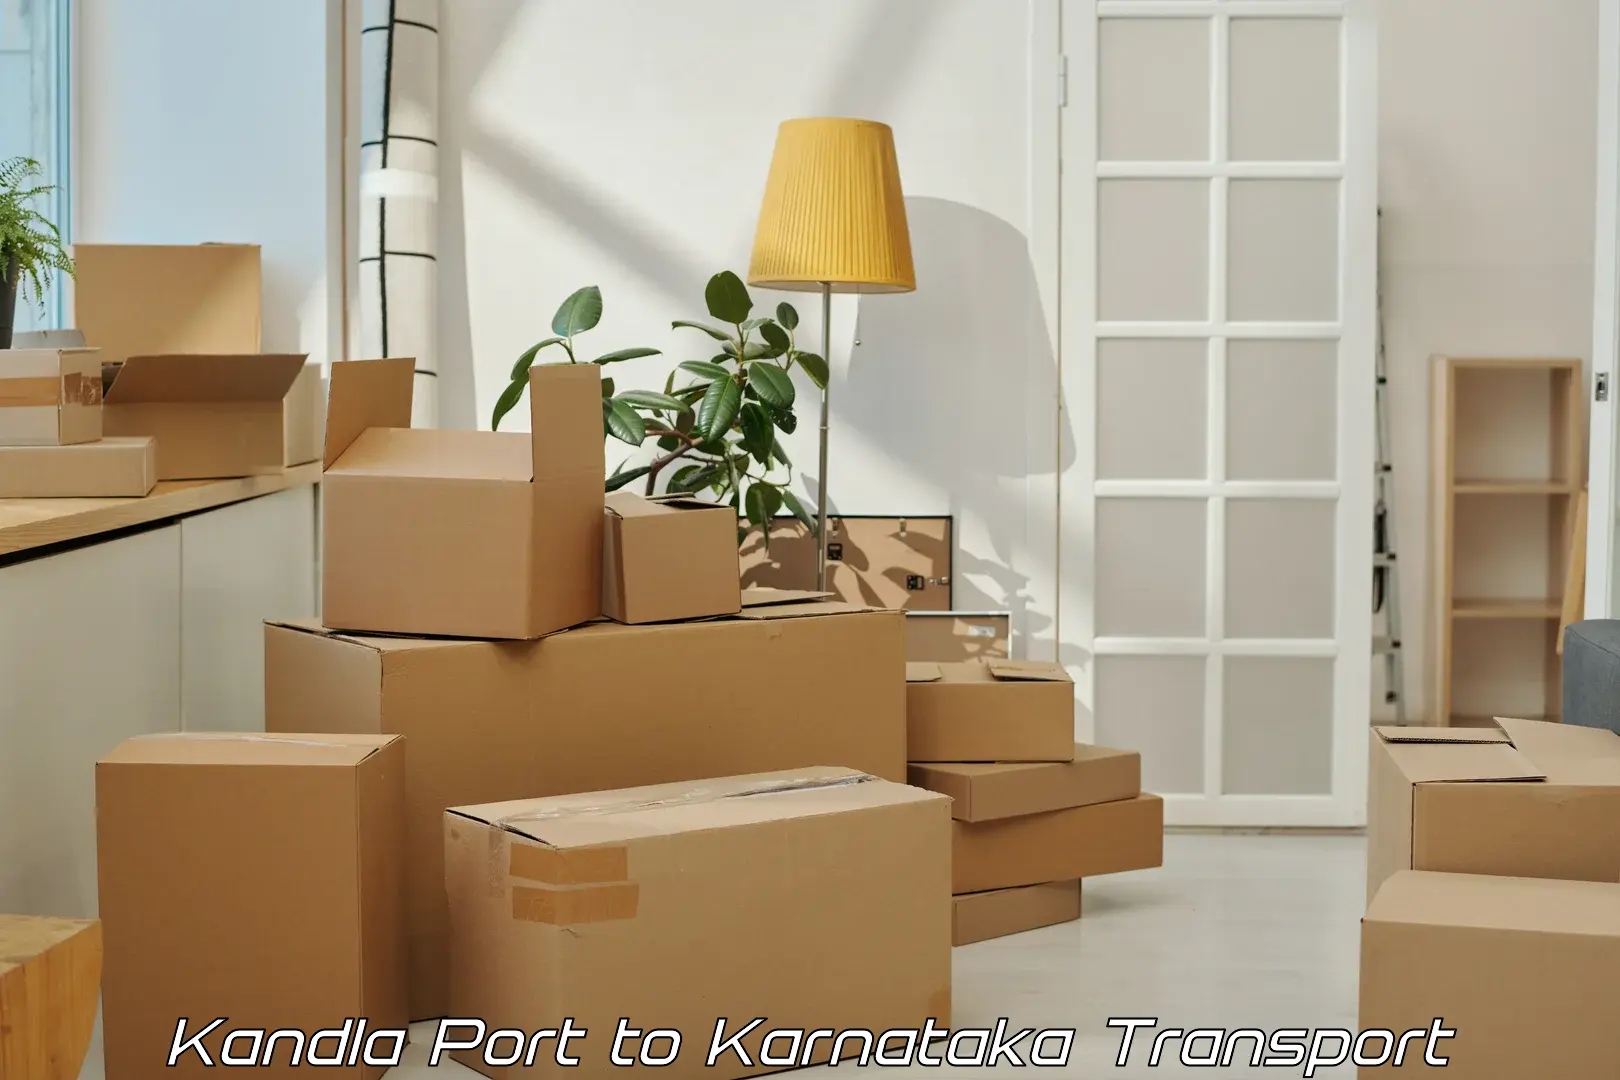 Goods transport services Kandla Port to Manipal Academy of Higher Education